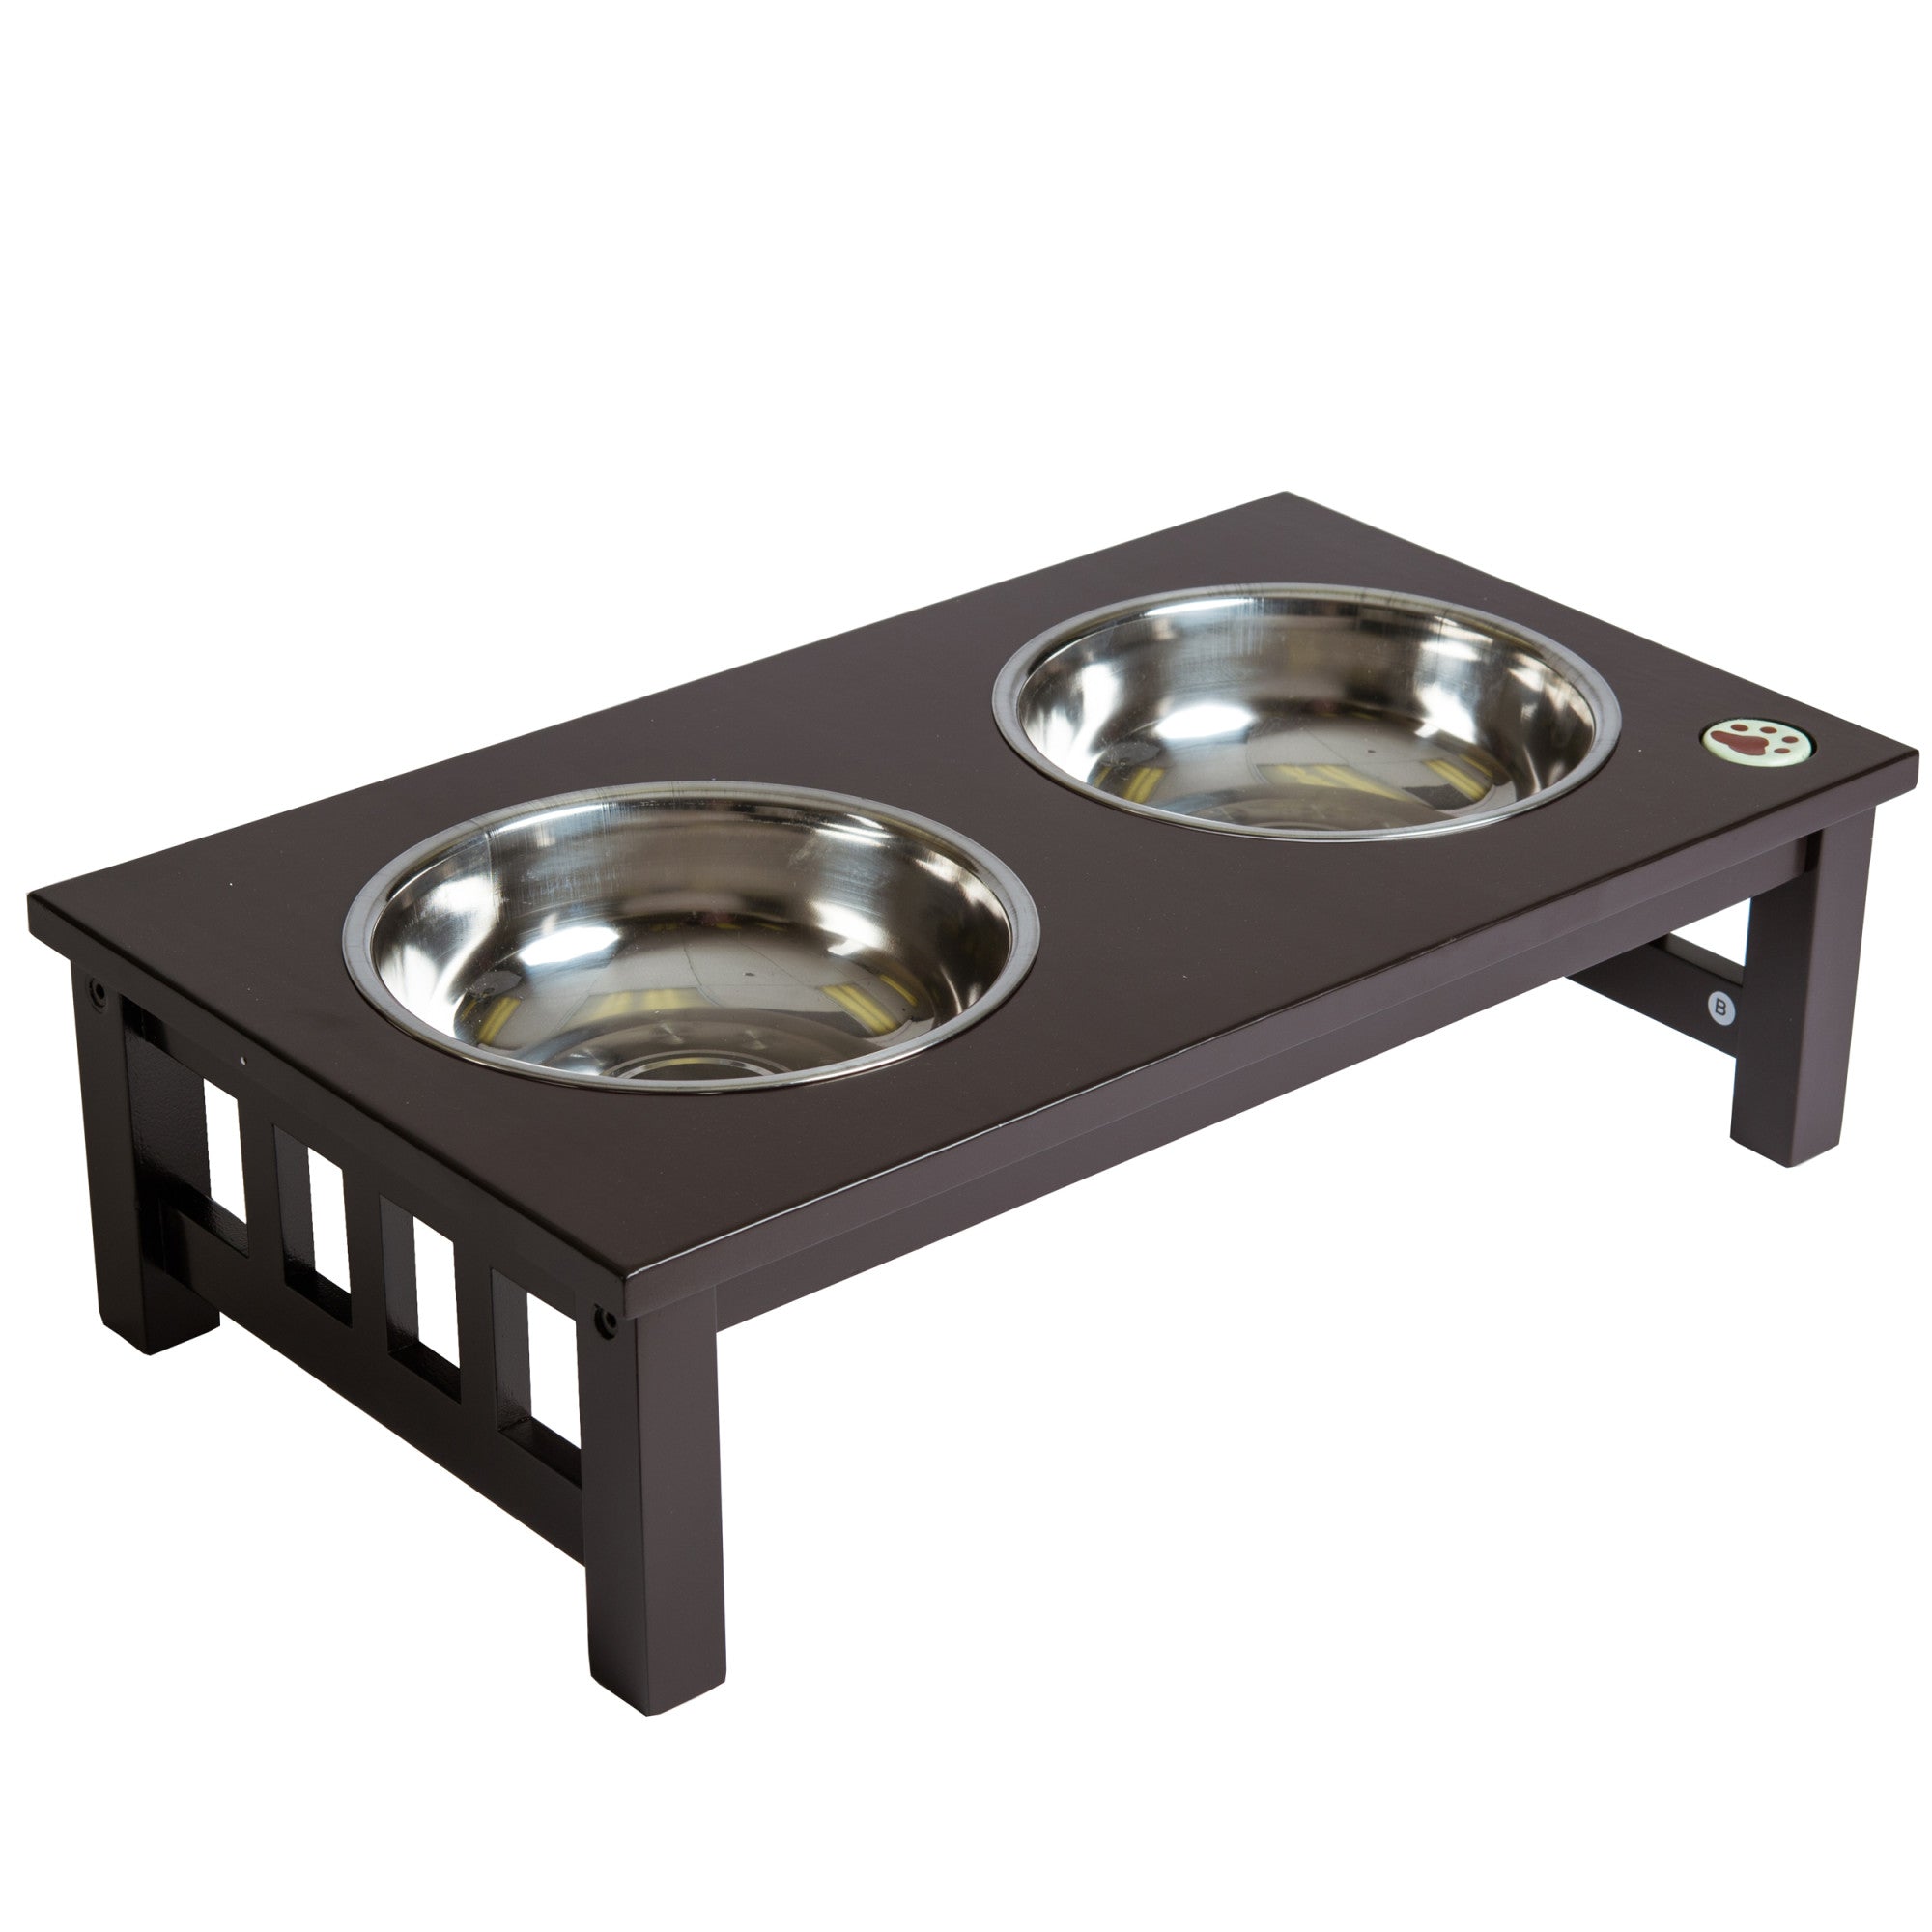 Teamson Pets 6.5" Pet Dog Feeder with 2 Stainless Steel Bowls, Espresso